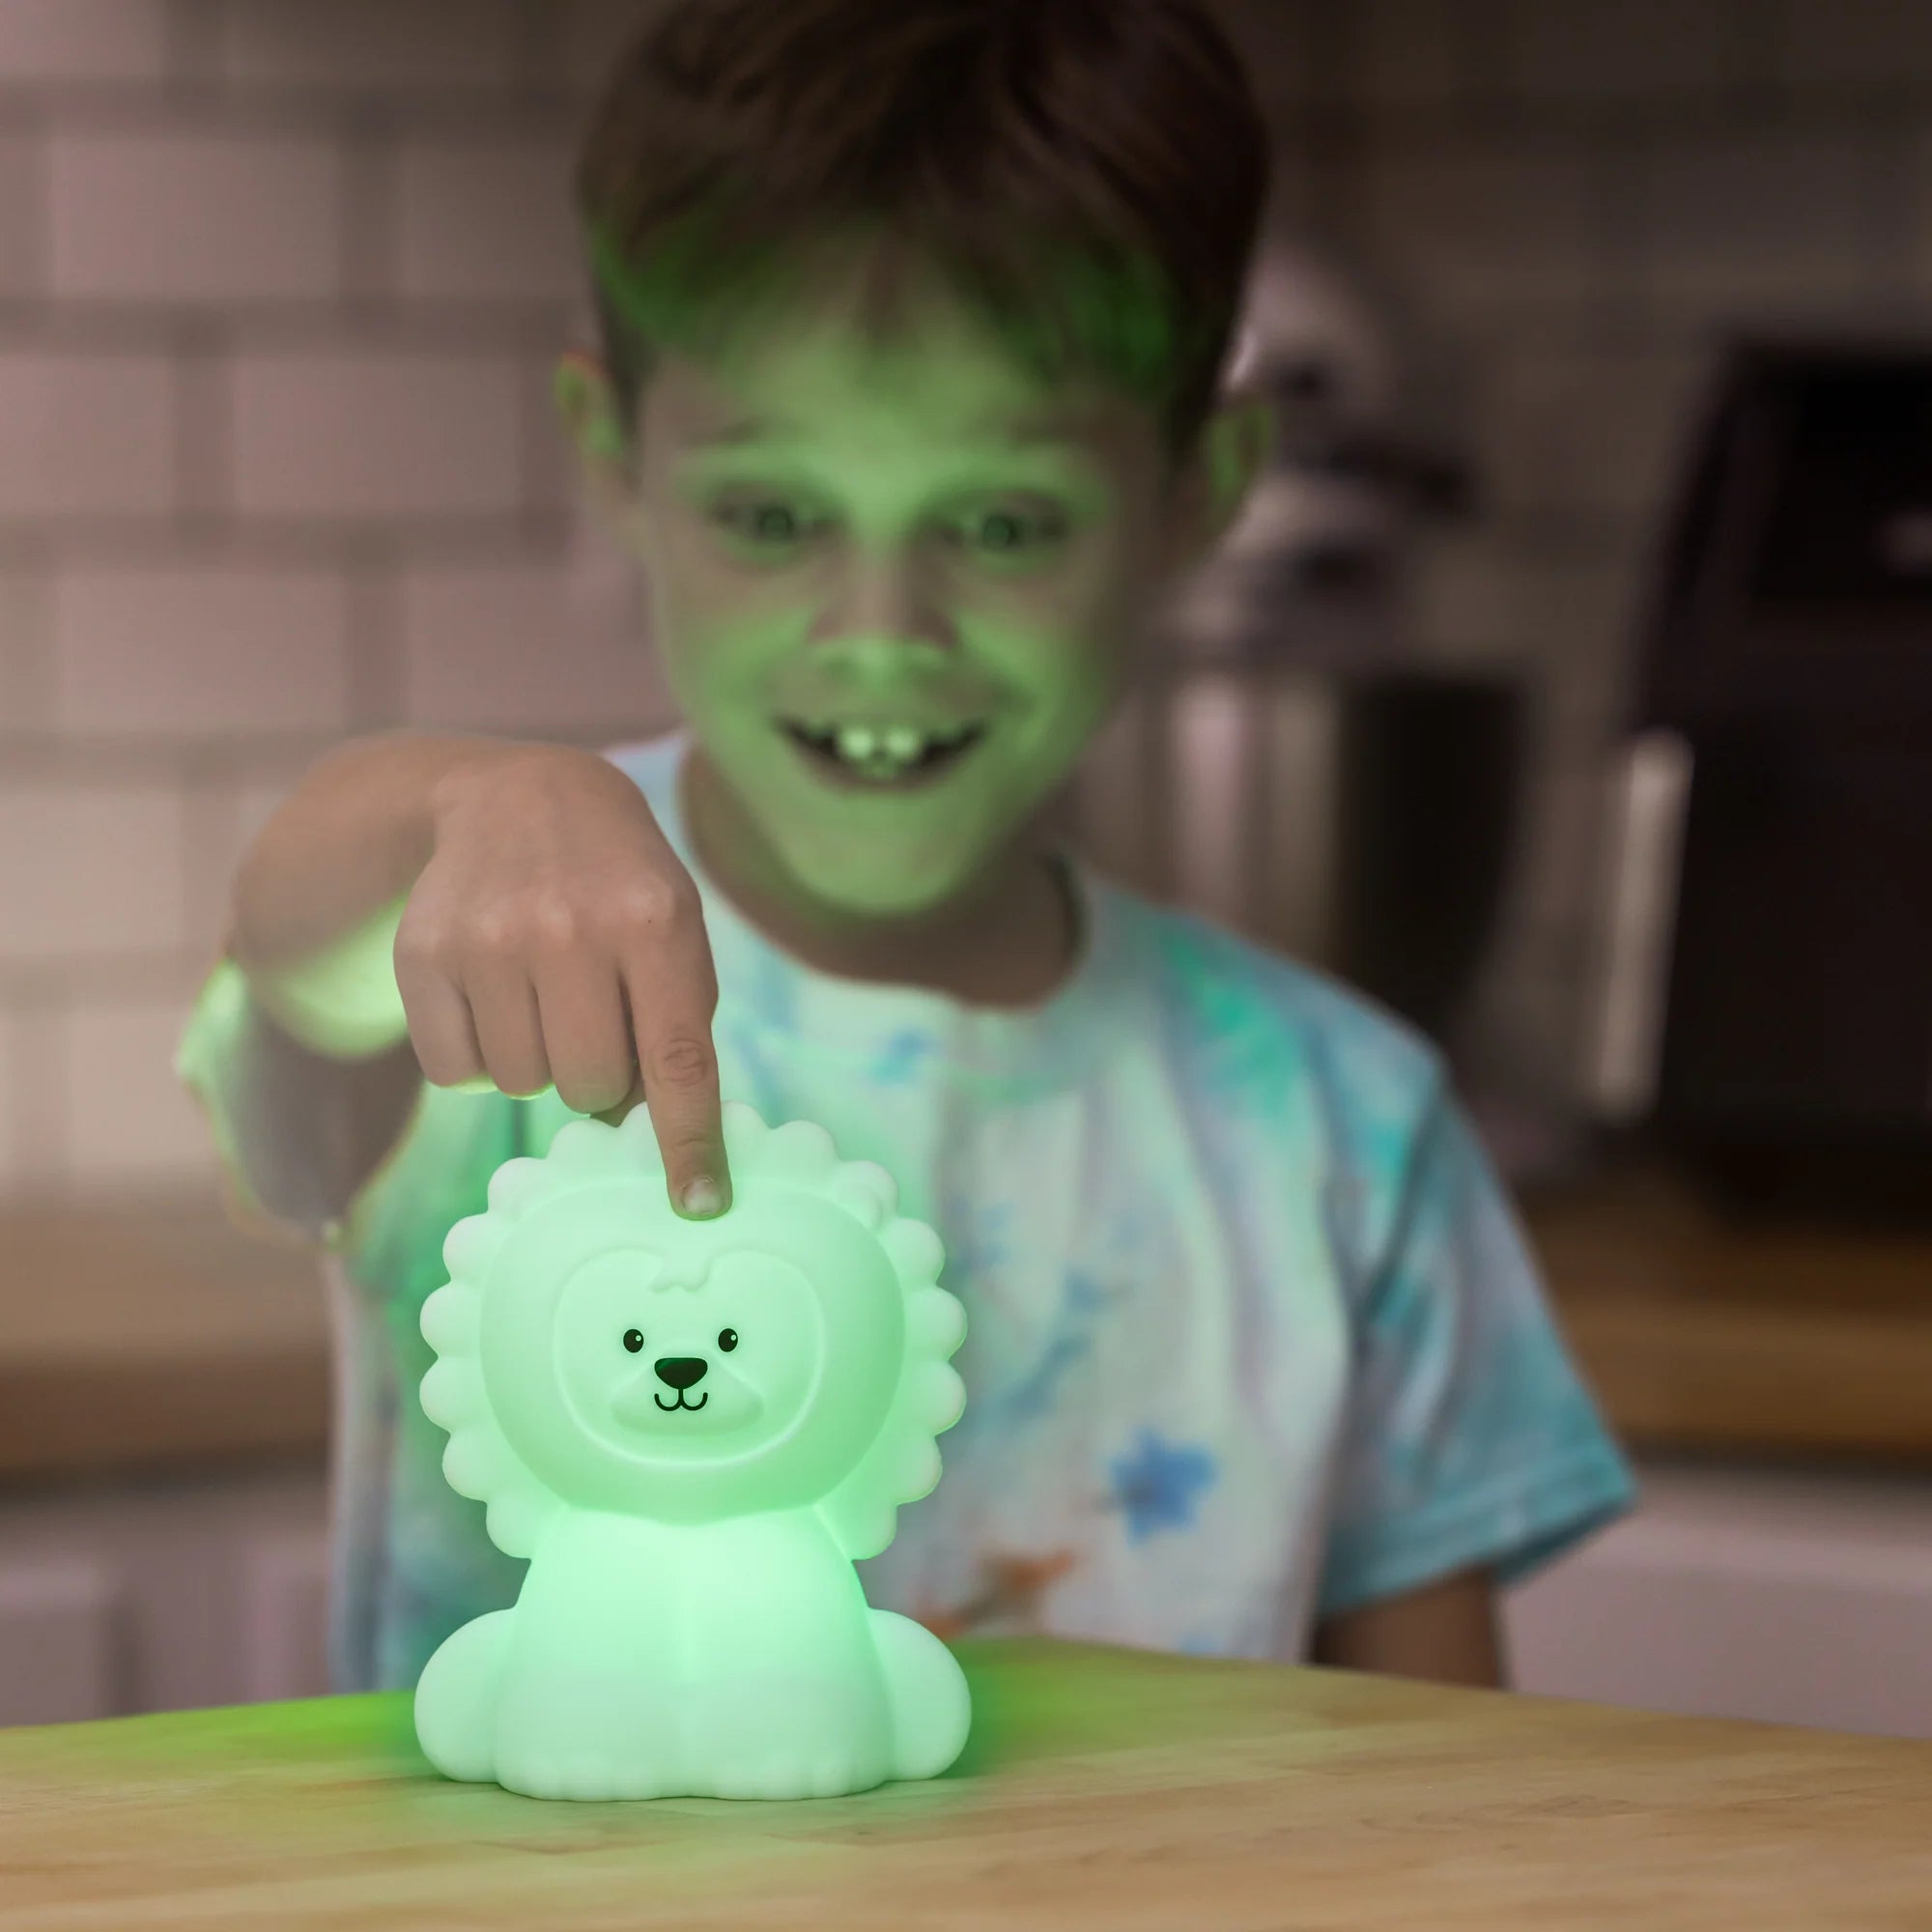 Lumieworld Silicone Tap Sensor LED Lion Night Light with Remote - ANB Baby -860008060174$20 - $50